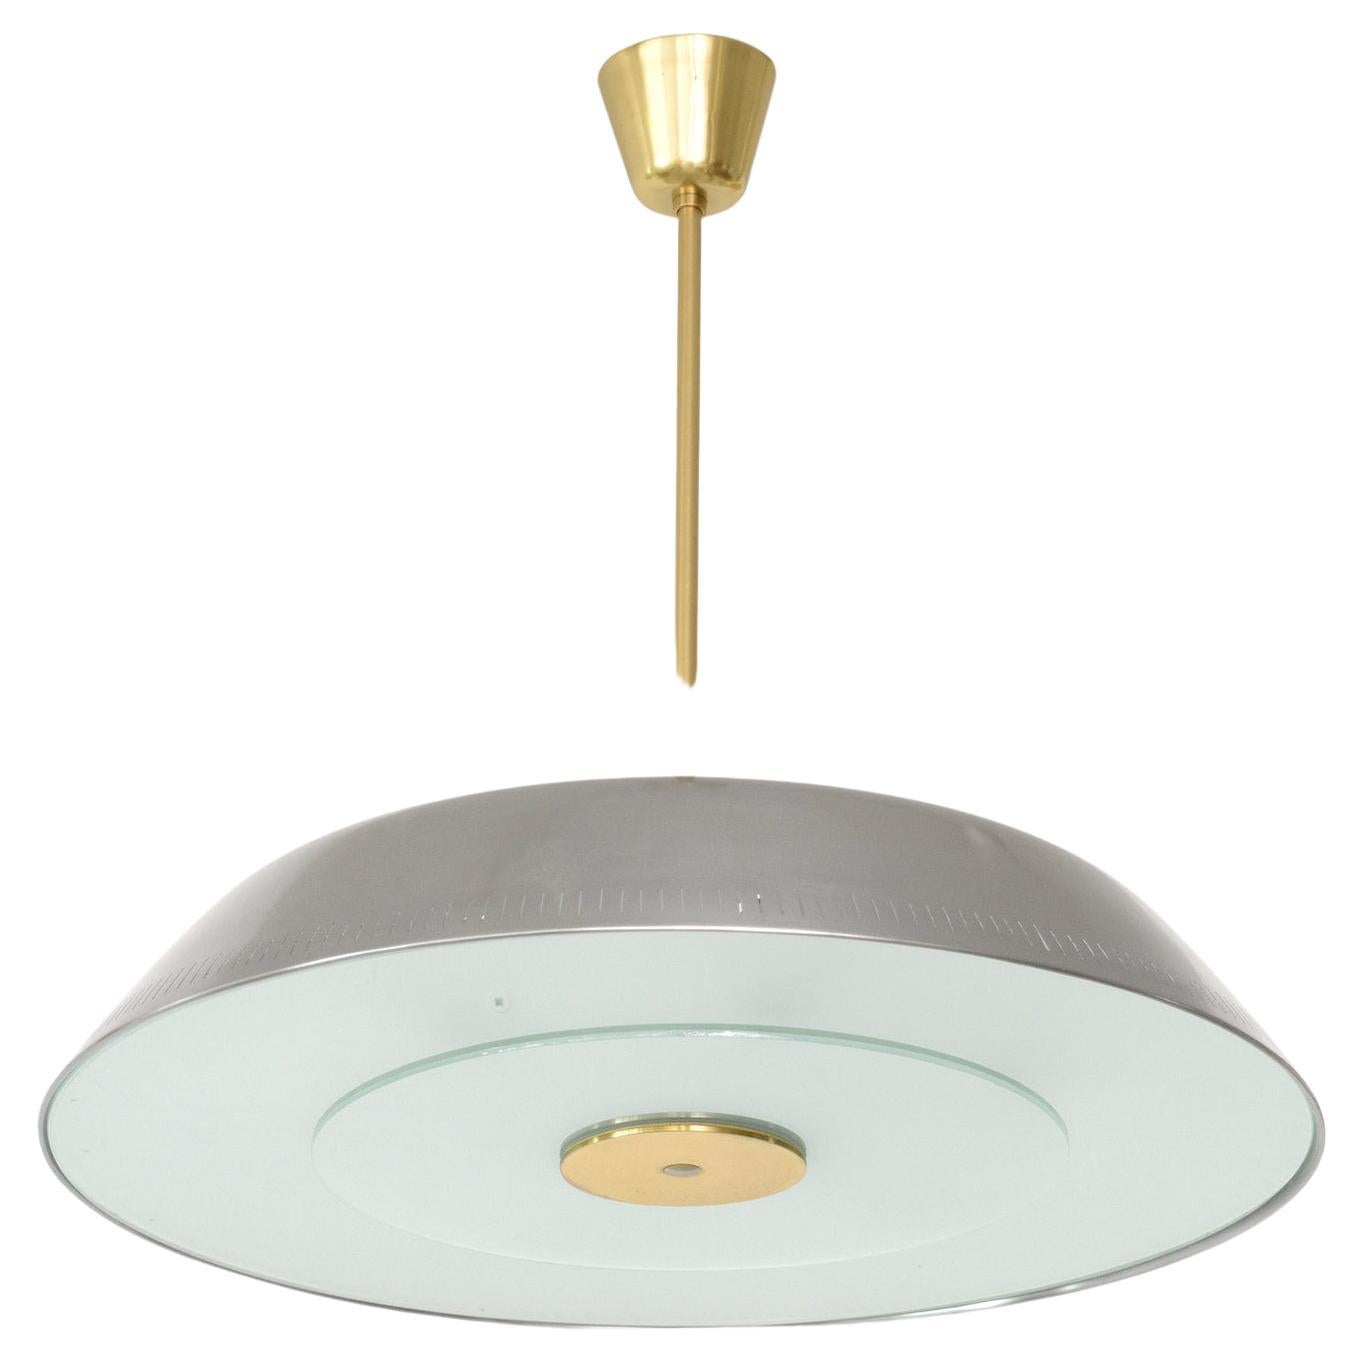 A very rare Scandinavian Modern polished steel and glass pendant designed by Harald Notini made by Böhlmarks, Sweden. This fixture has been completely restored and newly rewired with 6 internal standard base sockets and 3 additional sockets recessed